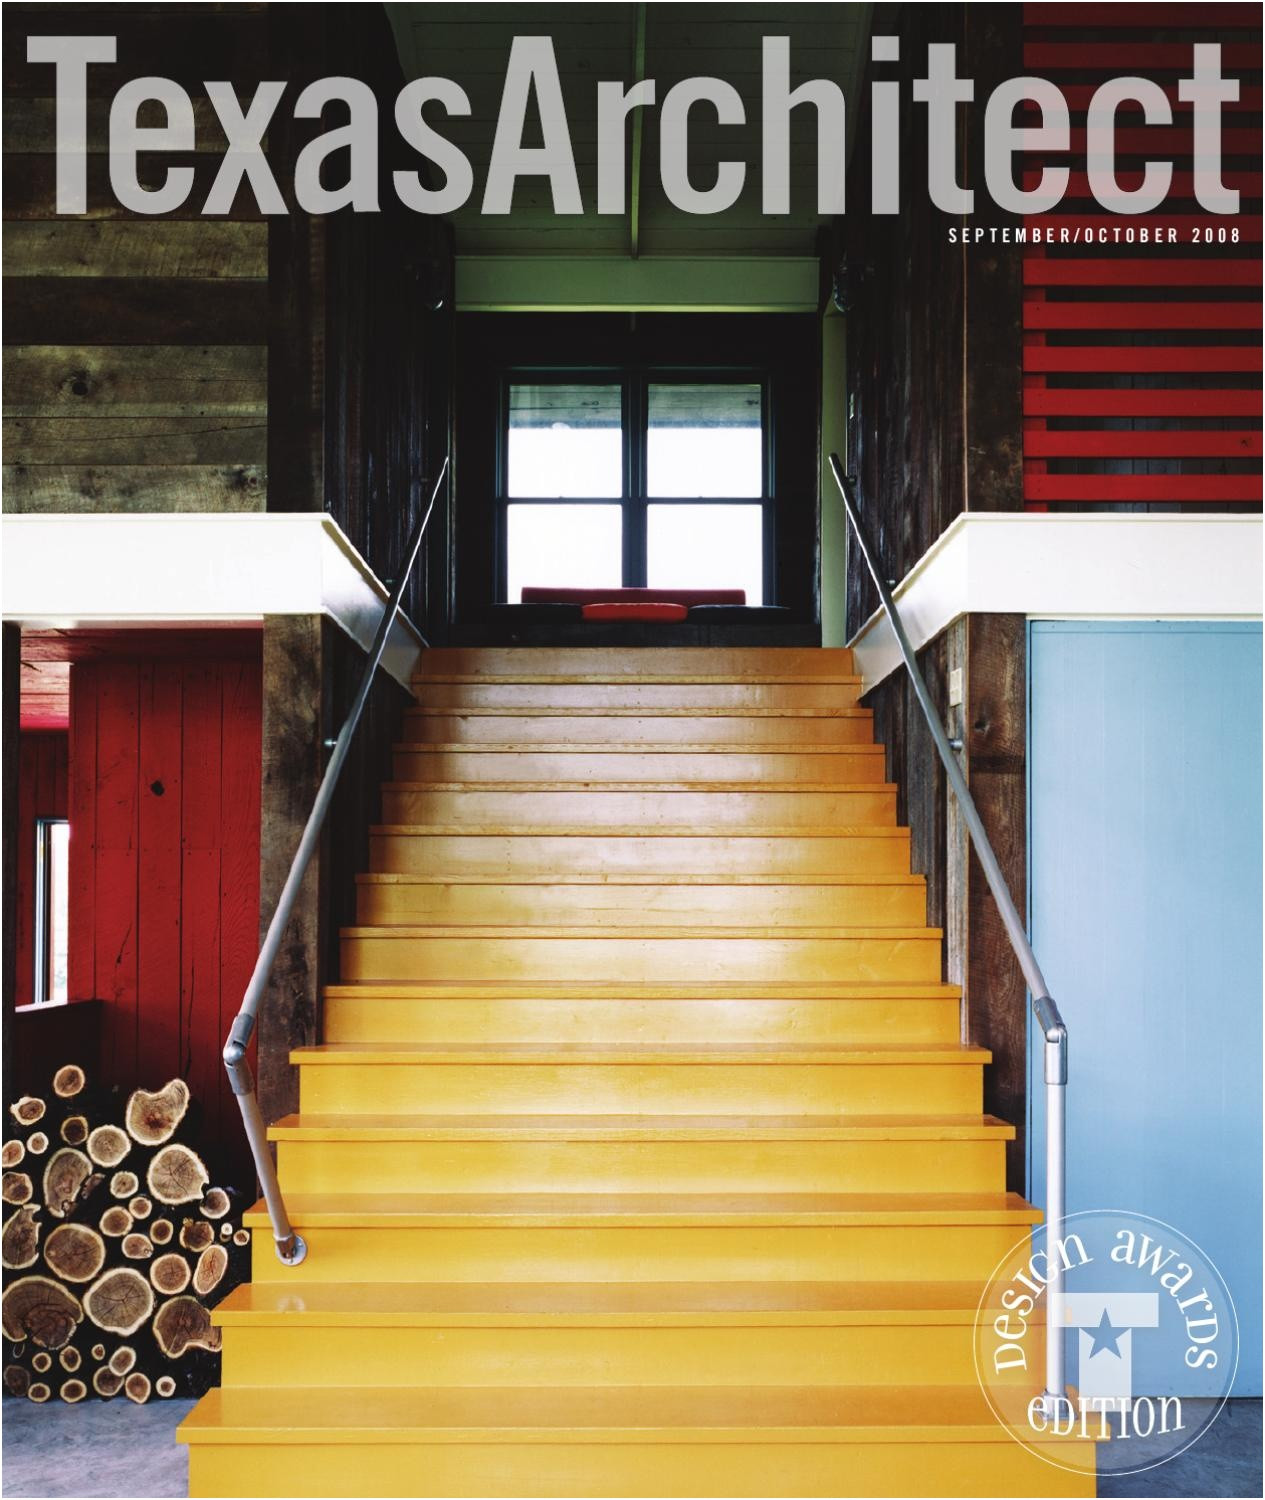 25 Fashionable Empire Hardwood Floors Llc 2024 free download empire hardwood floors llc of empire flooring and design center collection the way back forges a with regard to empire flooring and design center stock texas architect sept oct 2008 design a